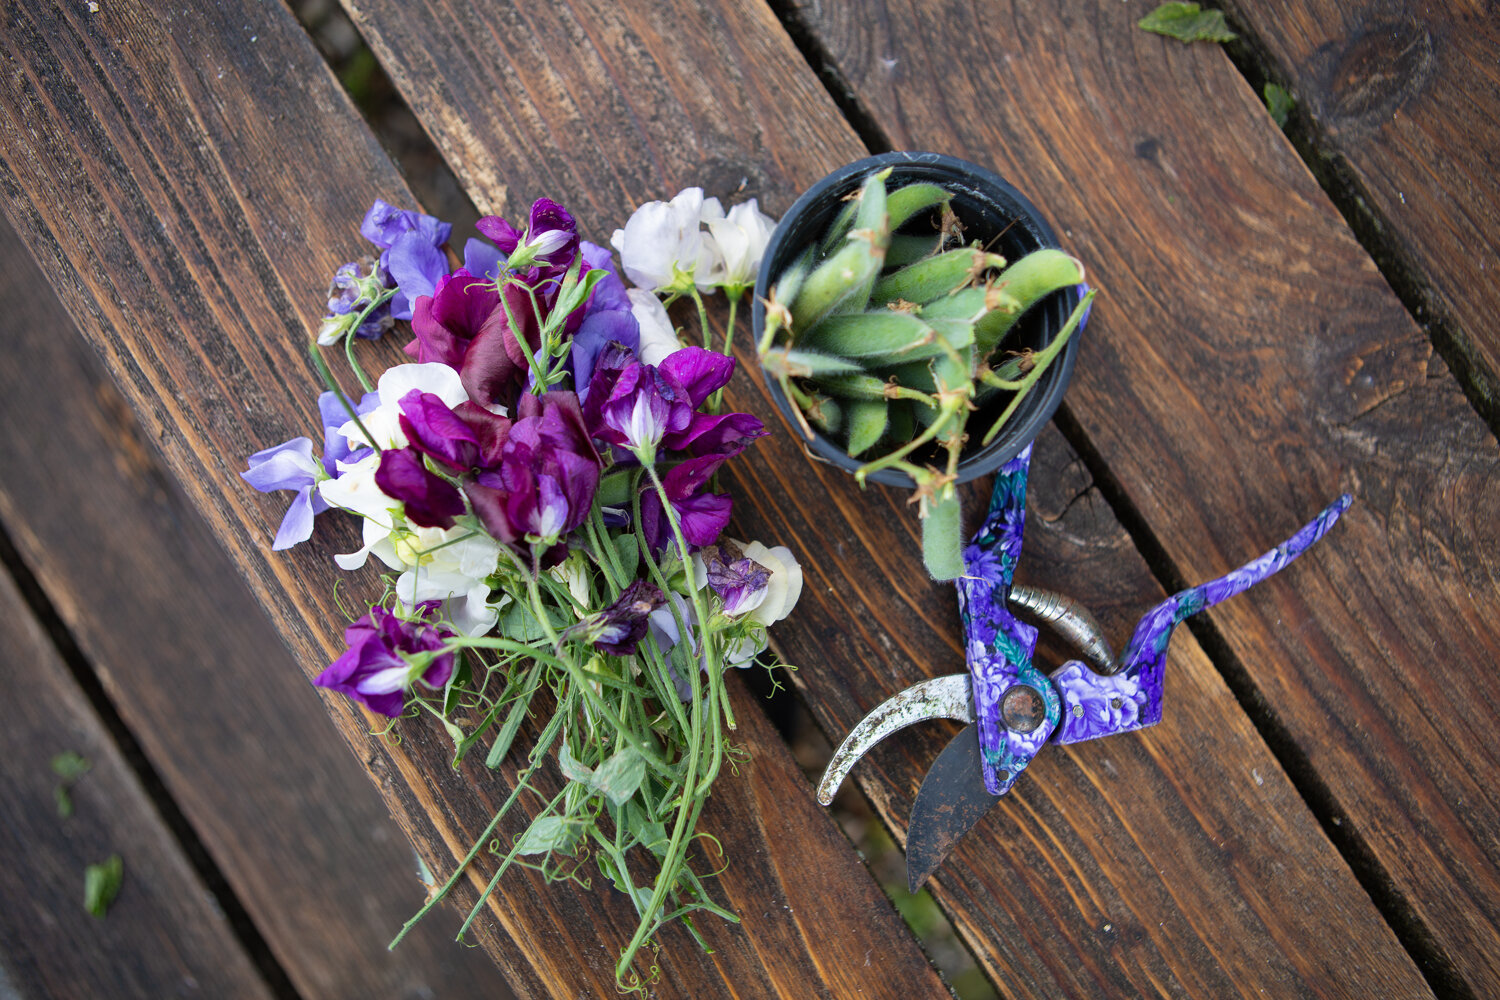 Sweetpeas and beans harvested at In Jolly Good Company's Step Outside Gardening Group at Kingston Lacy